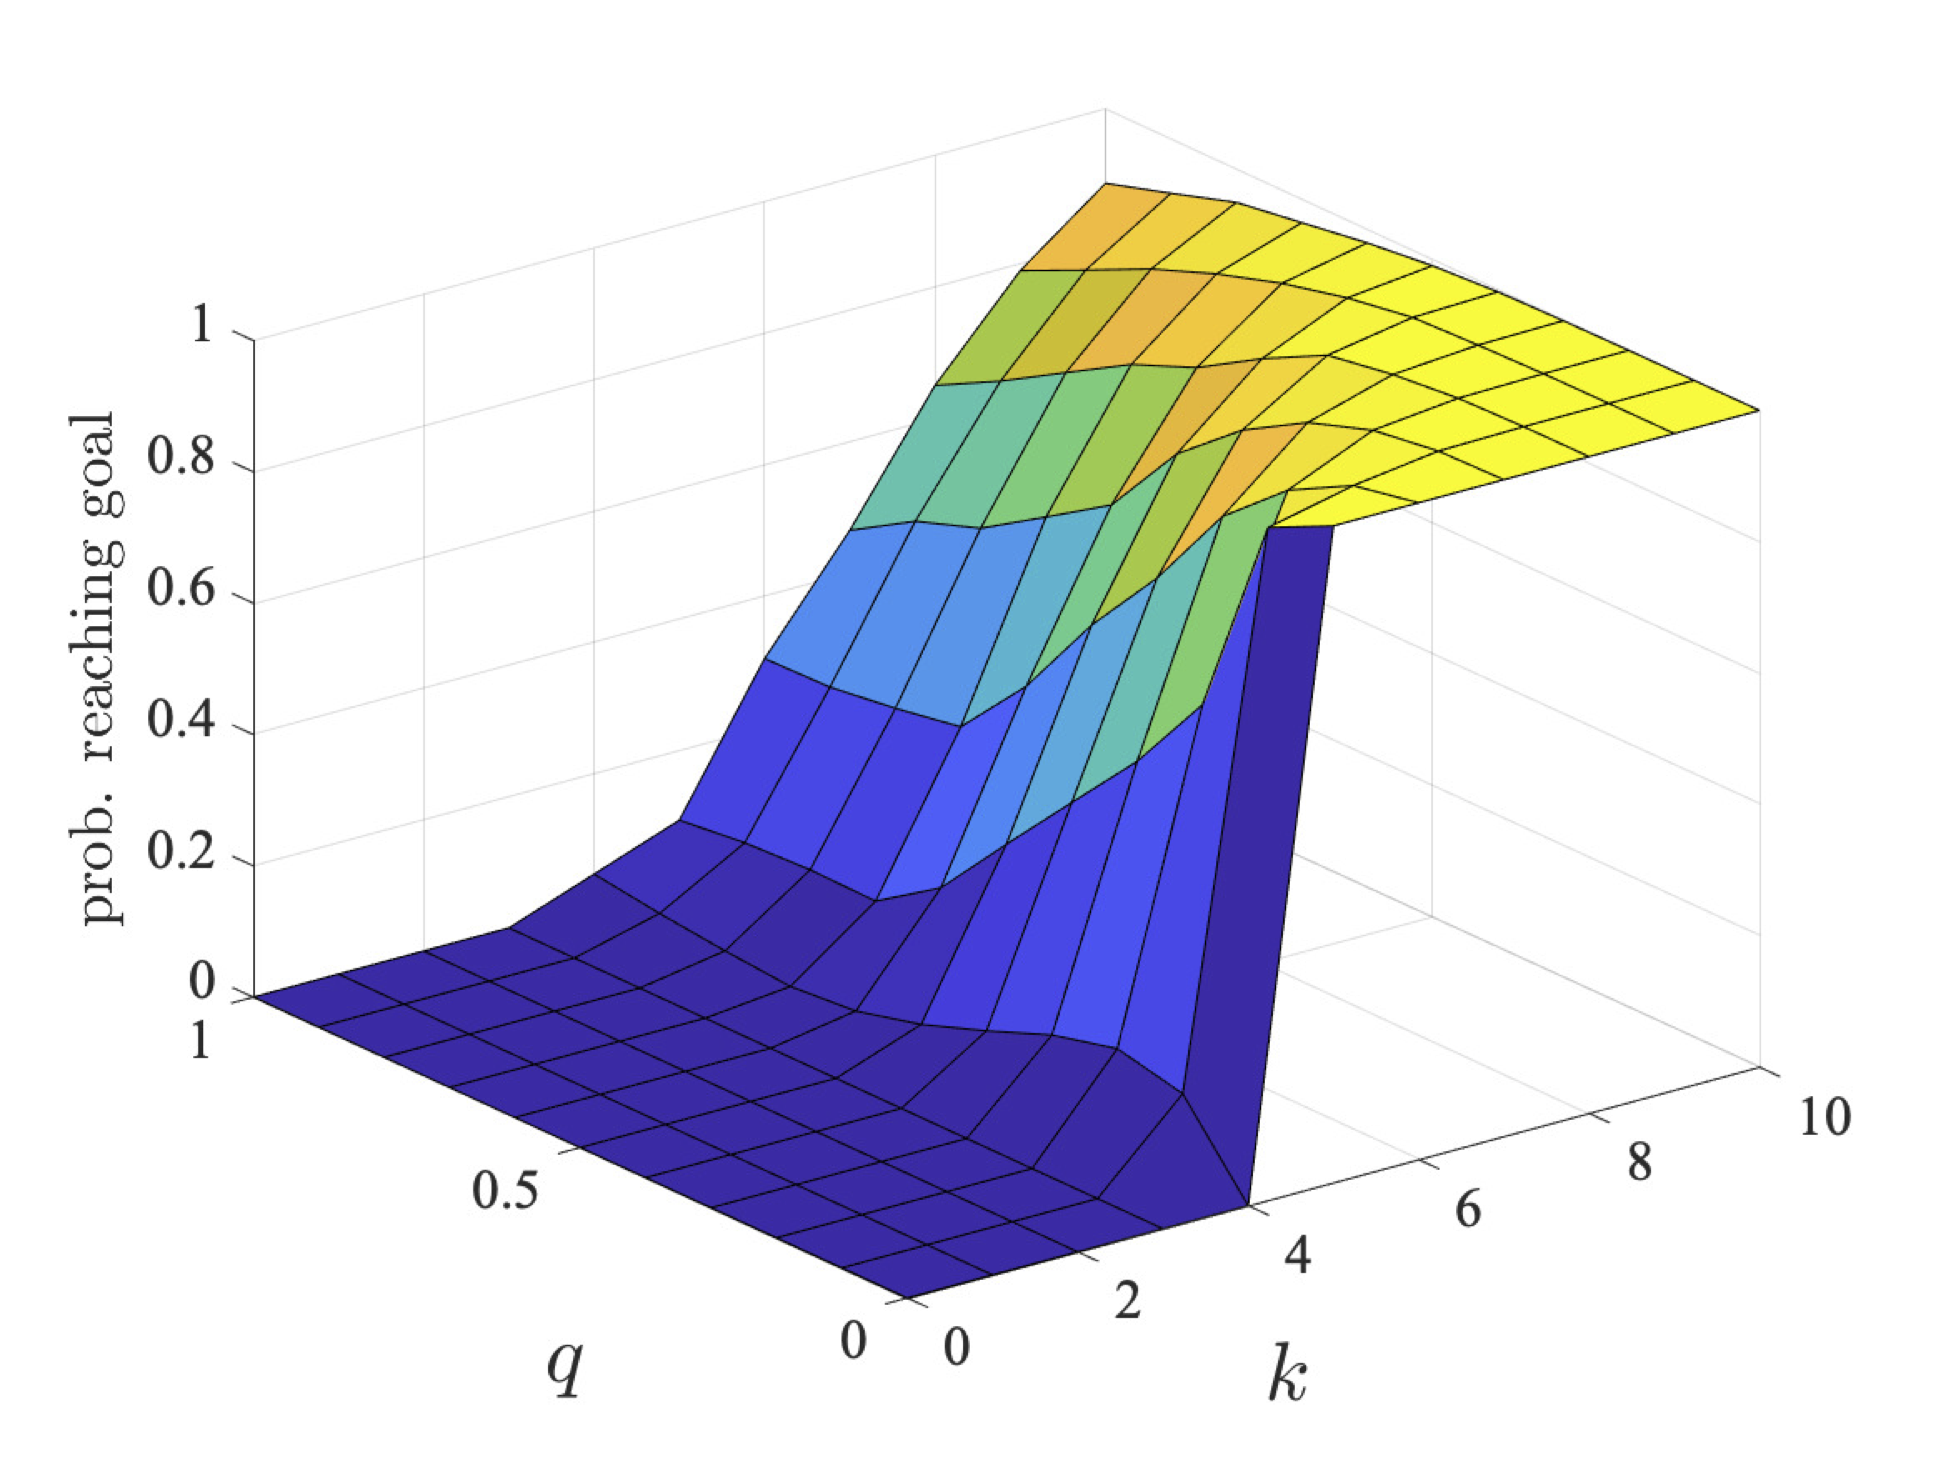 plot: maximum probability robot 2 can ensure they reach their goal within a deadline (l=5)